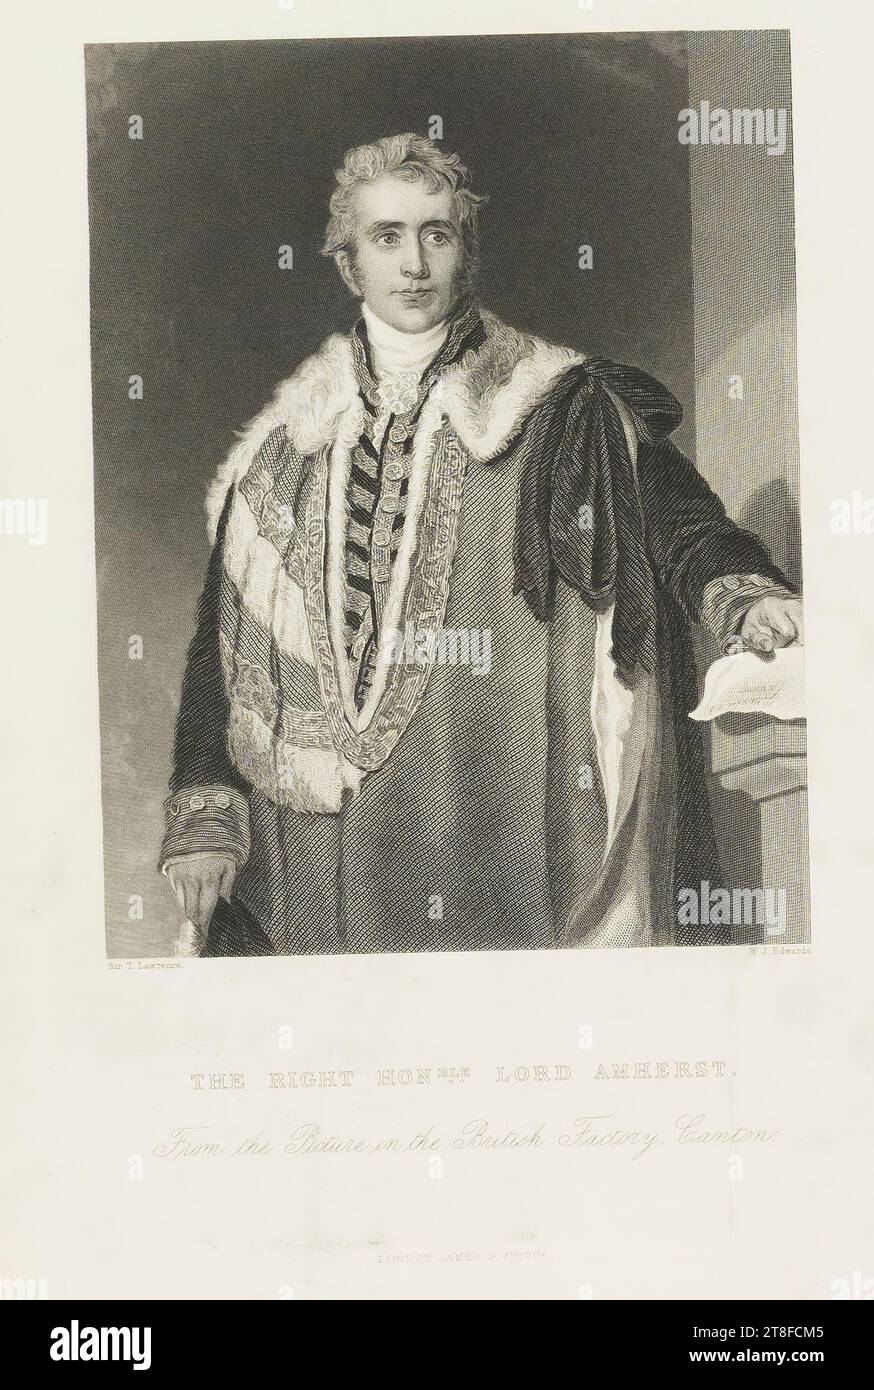 Sir. T. Lawrence. W.J. Edwards. THE RIGHT HONBLE LORD AMHERST., From hte Picture in the British Factory Carton. London James S. Virtue Stock Photo